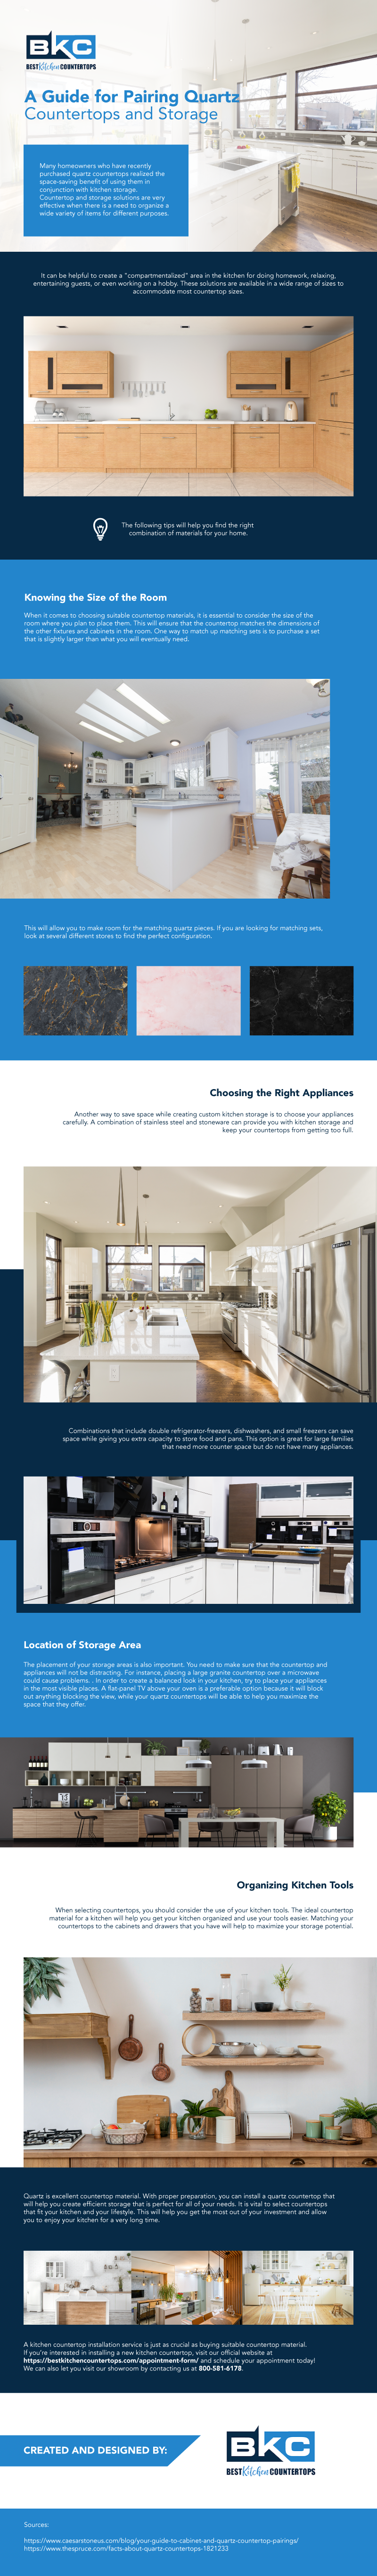 A Guide for Pairing Quartz Countertops and Storage ( Infographic ) | California